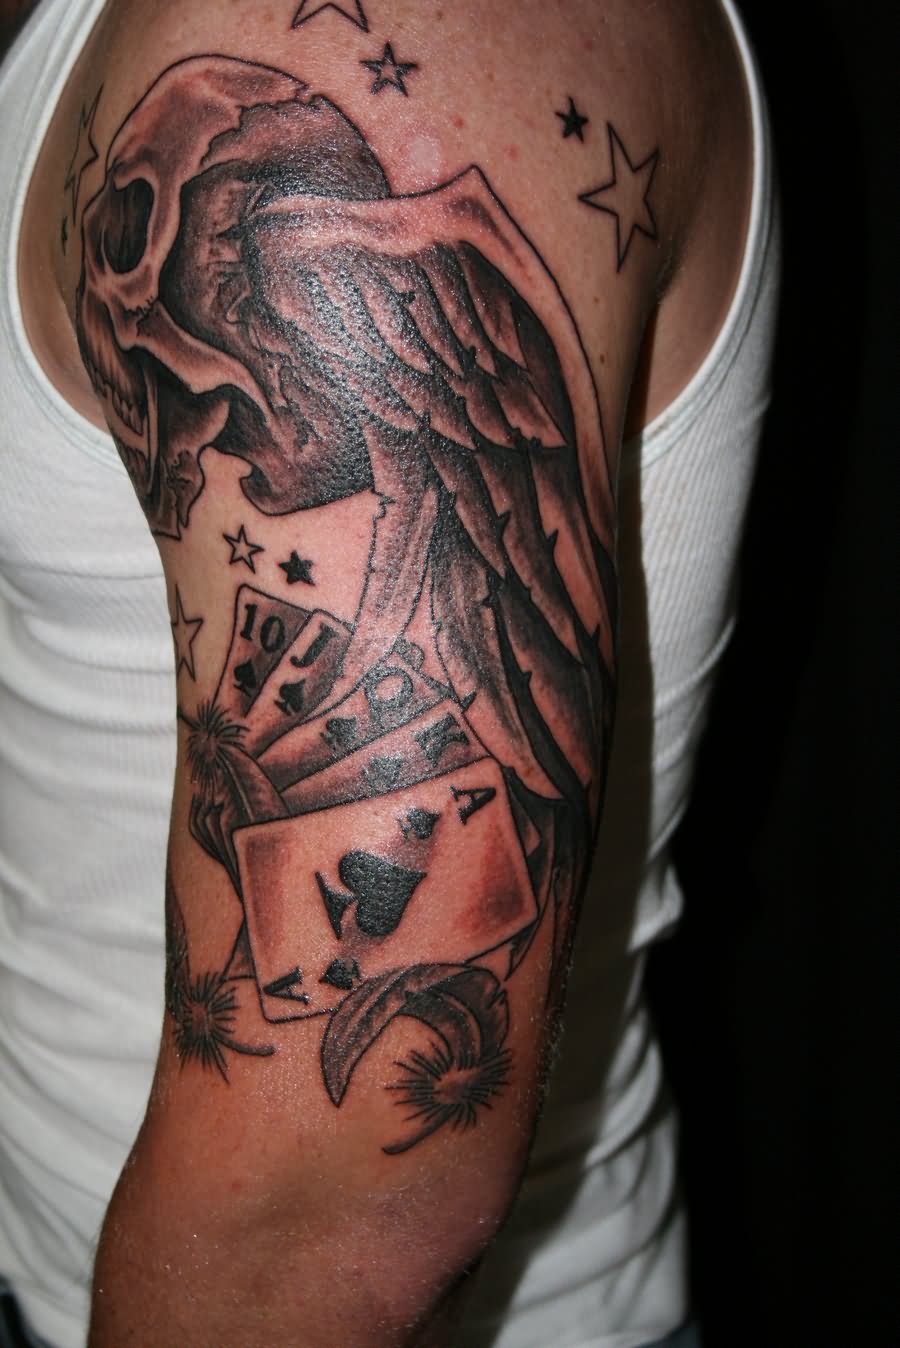 Winged Skull And Playing Cards Half Sleeve Tattoo